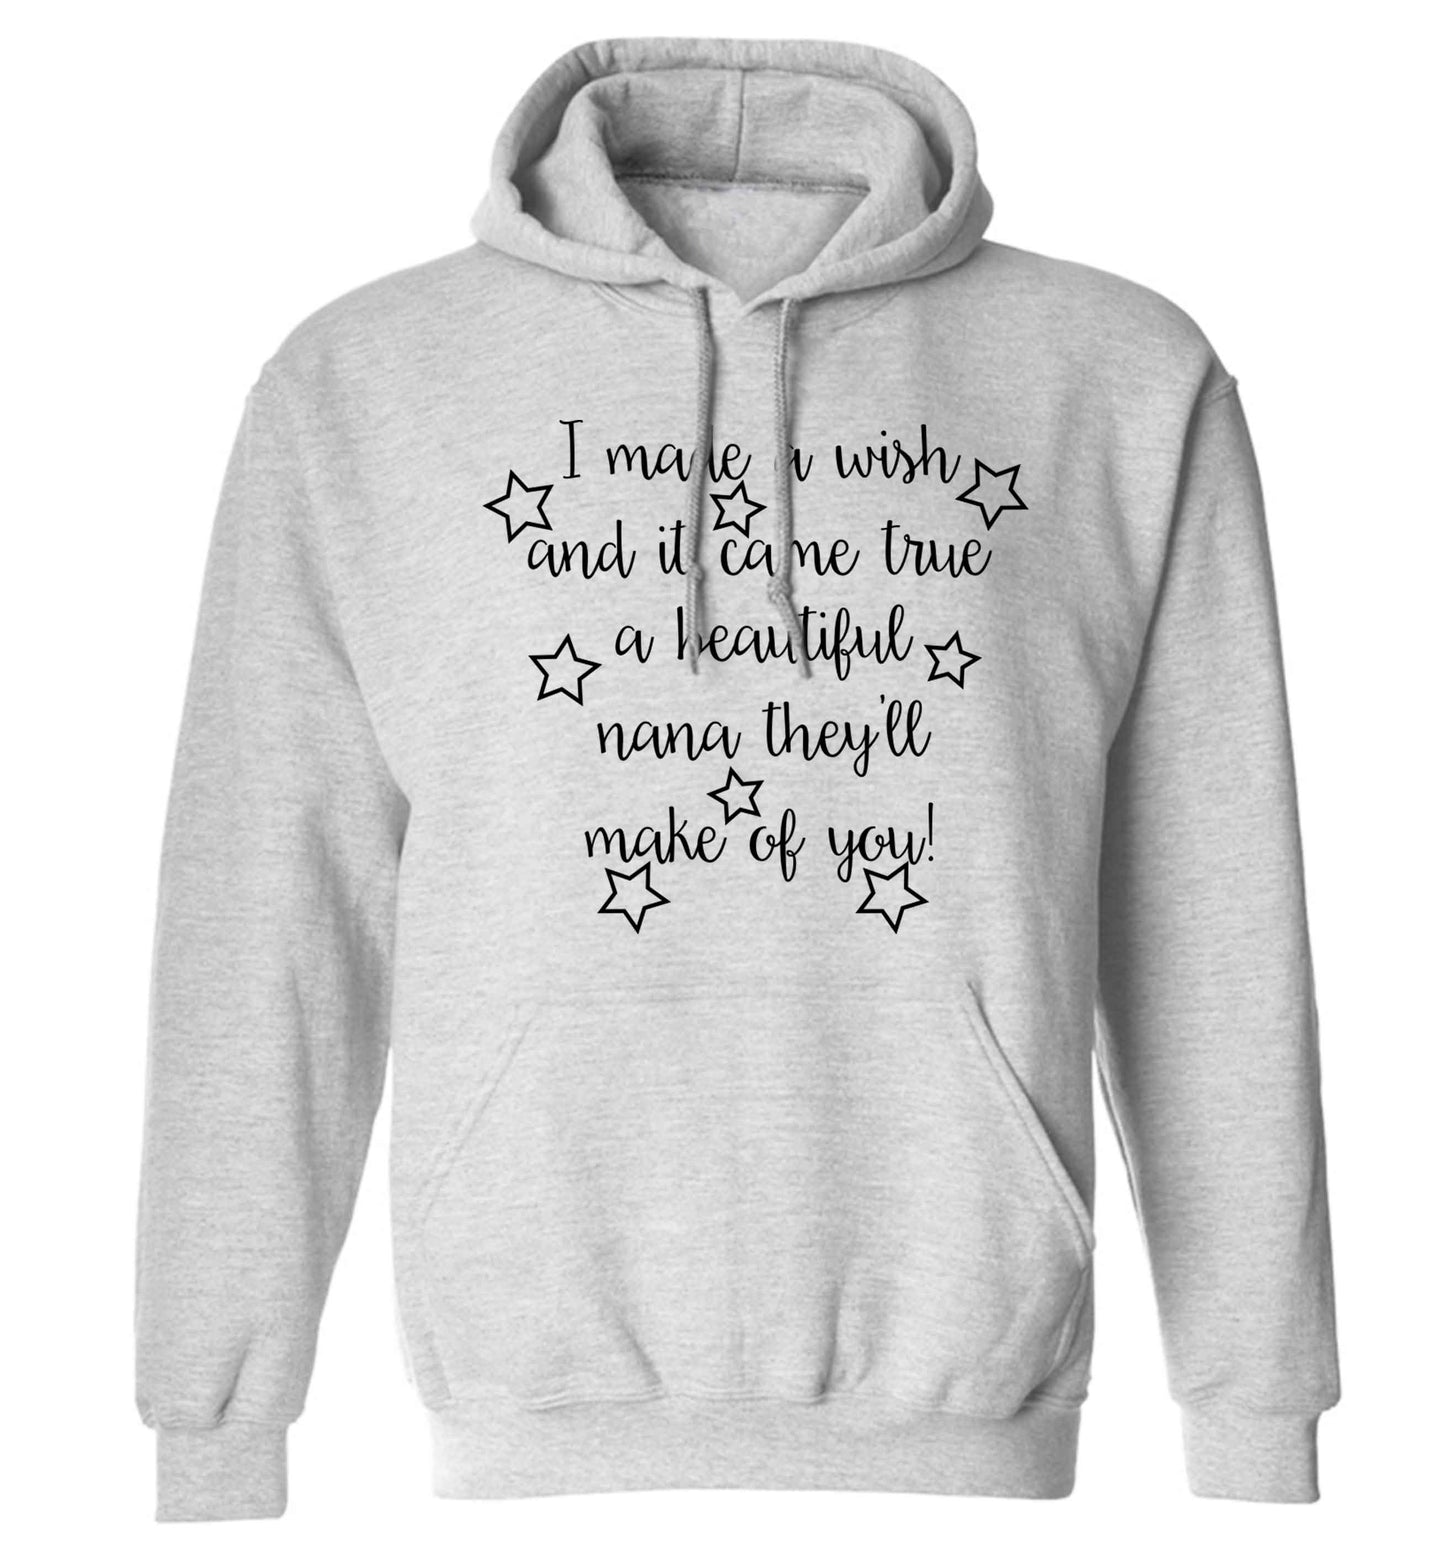 I made a wish and it came true a beautiful nana they'll make of you! adults unisex grey hoodie 2XL